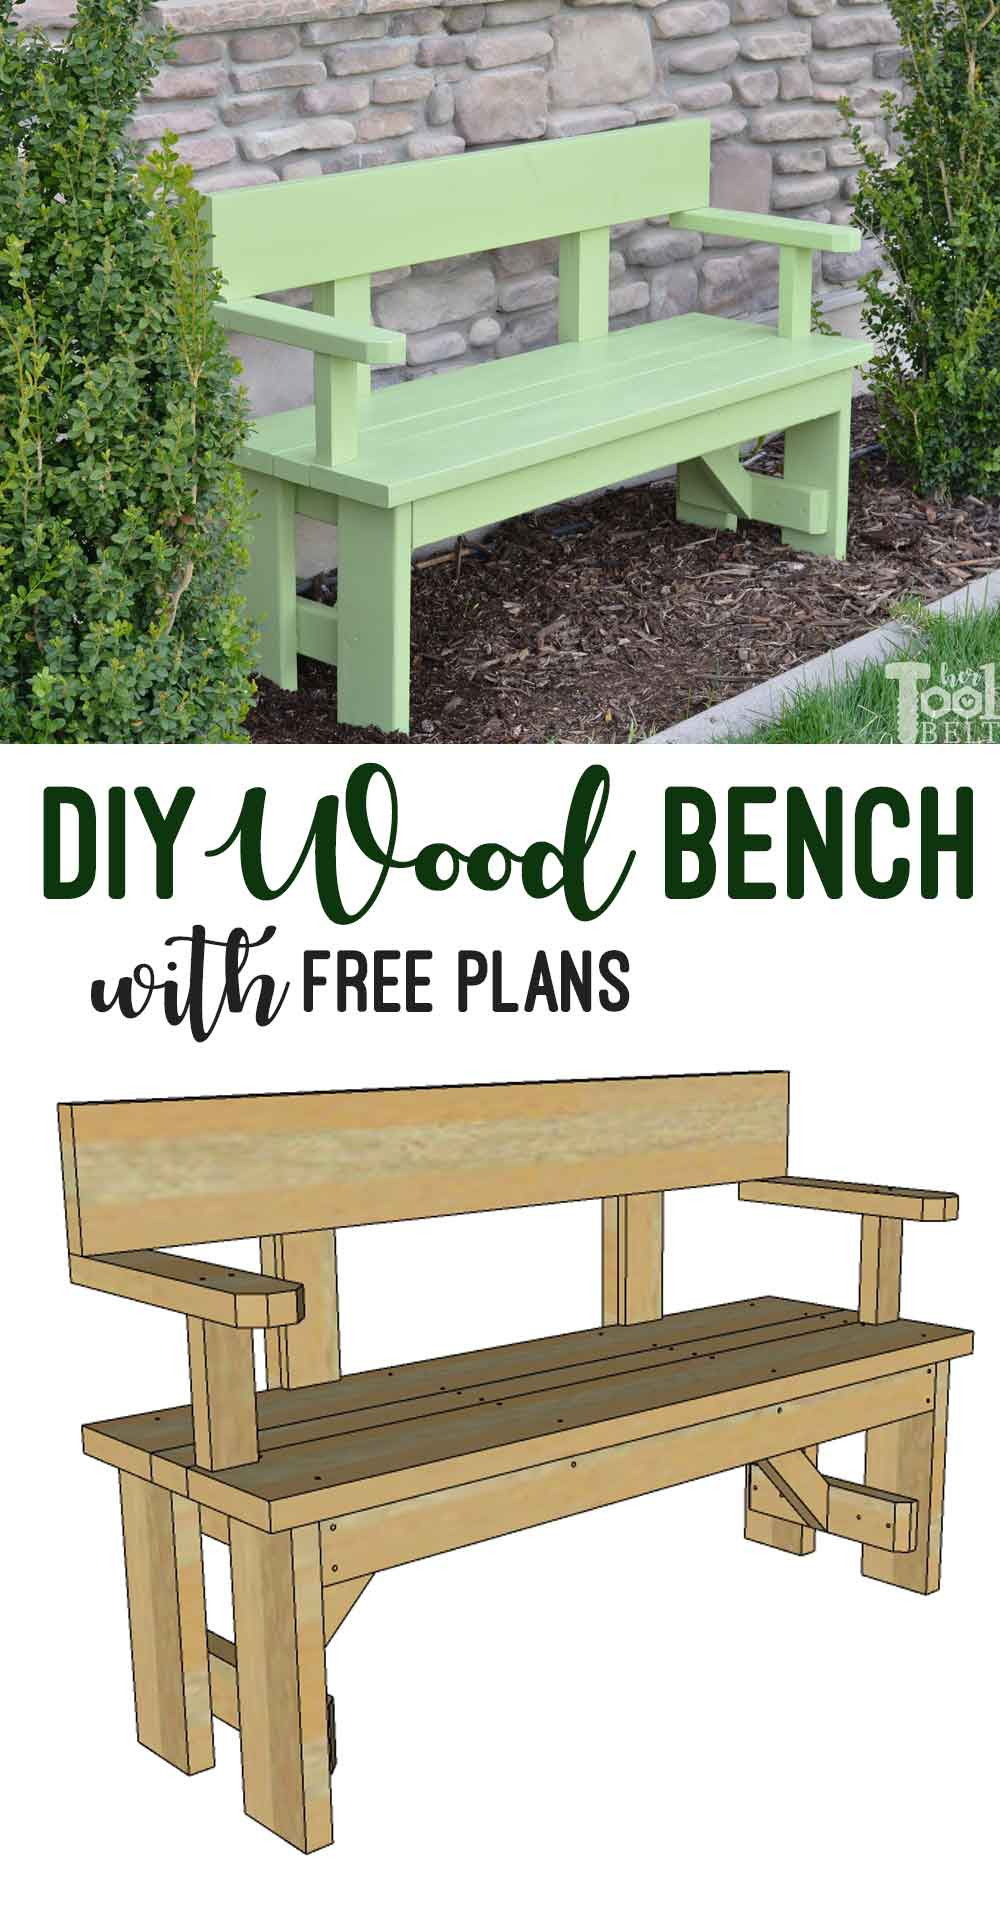 Wooden Bench DIY
 DIY Wood Bench with Back Plans Her Tool Belt